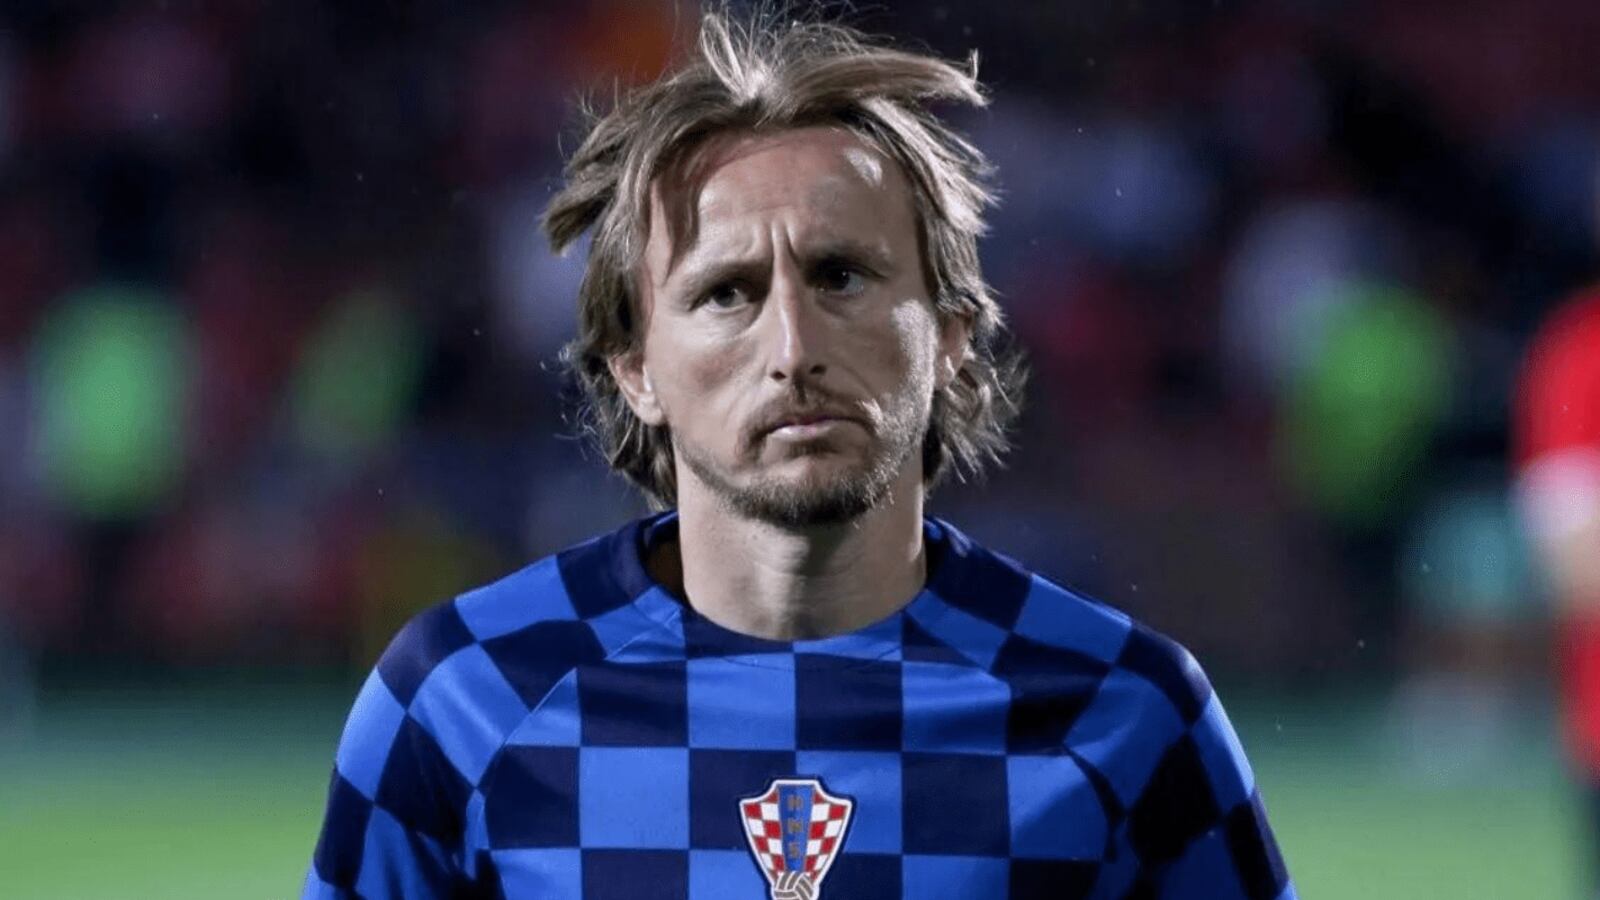 From Croatia, Luka Modric and a message for Carlo Ancelotti and Madrid